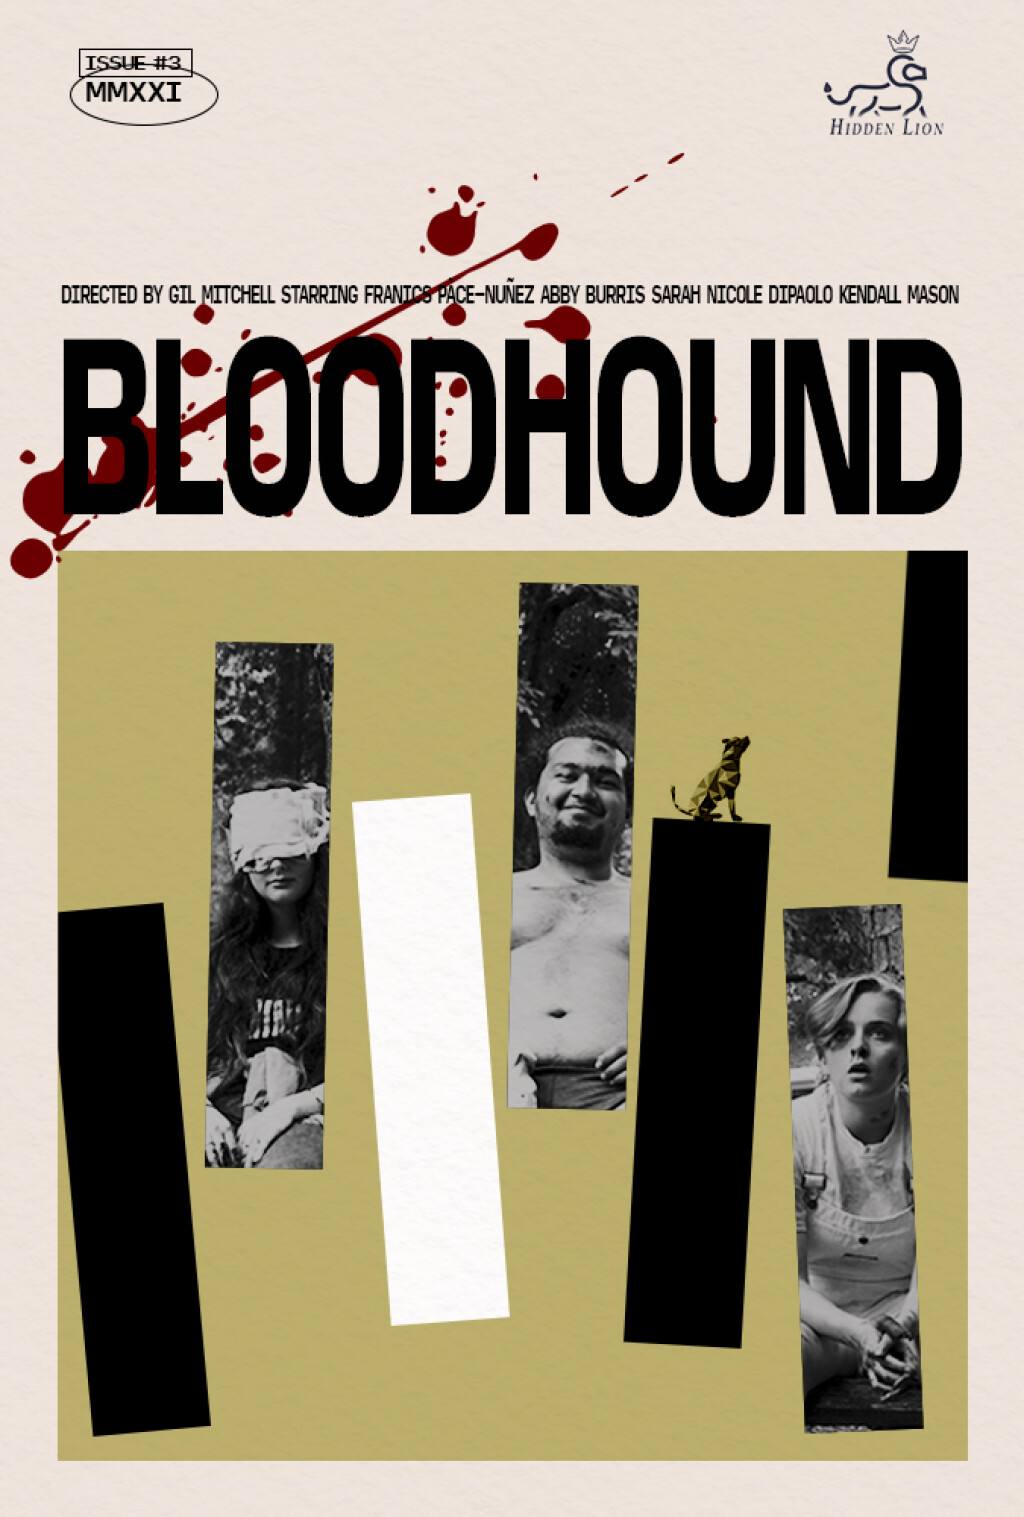 Filmposter for Bloodhound